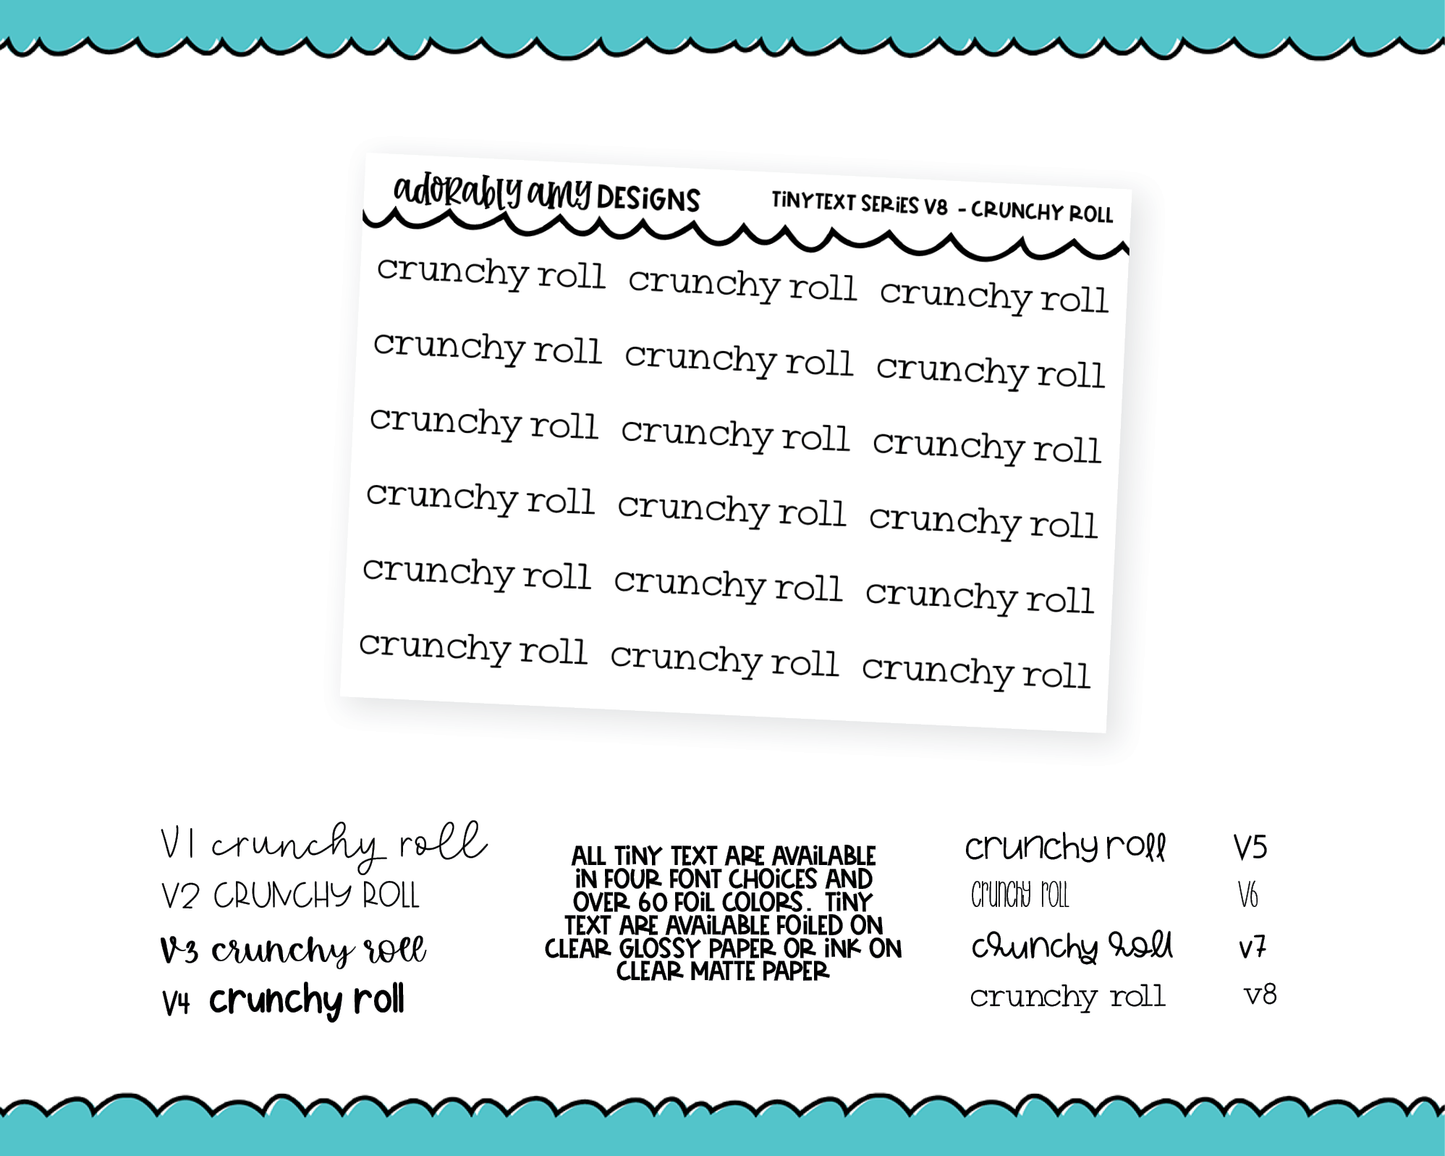 Foiled Tiny Text Series - Crunchy Roll Checklist Size Planner Stickers for any Planner or Insert